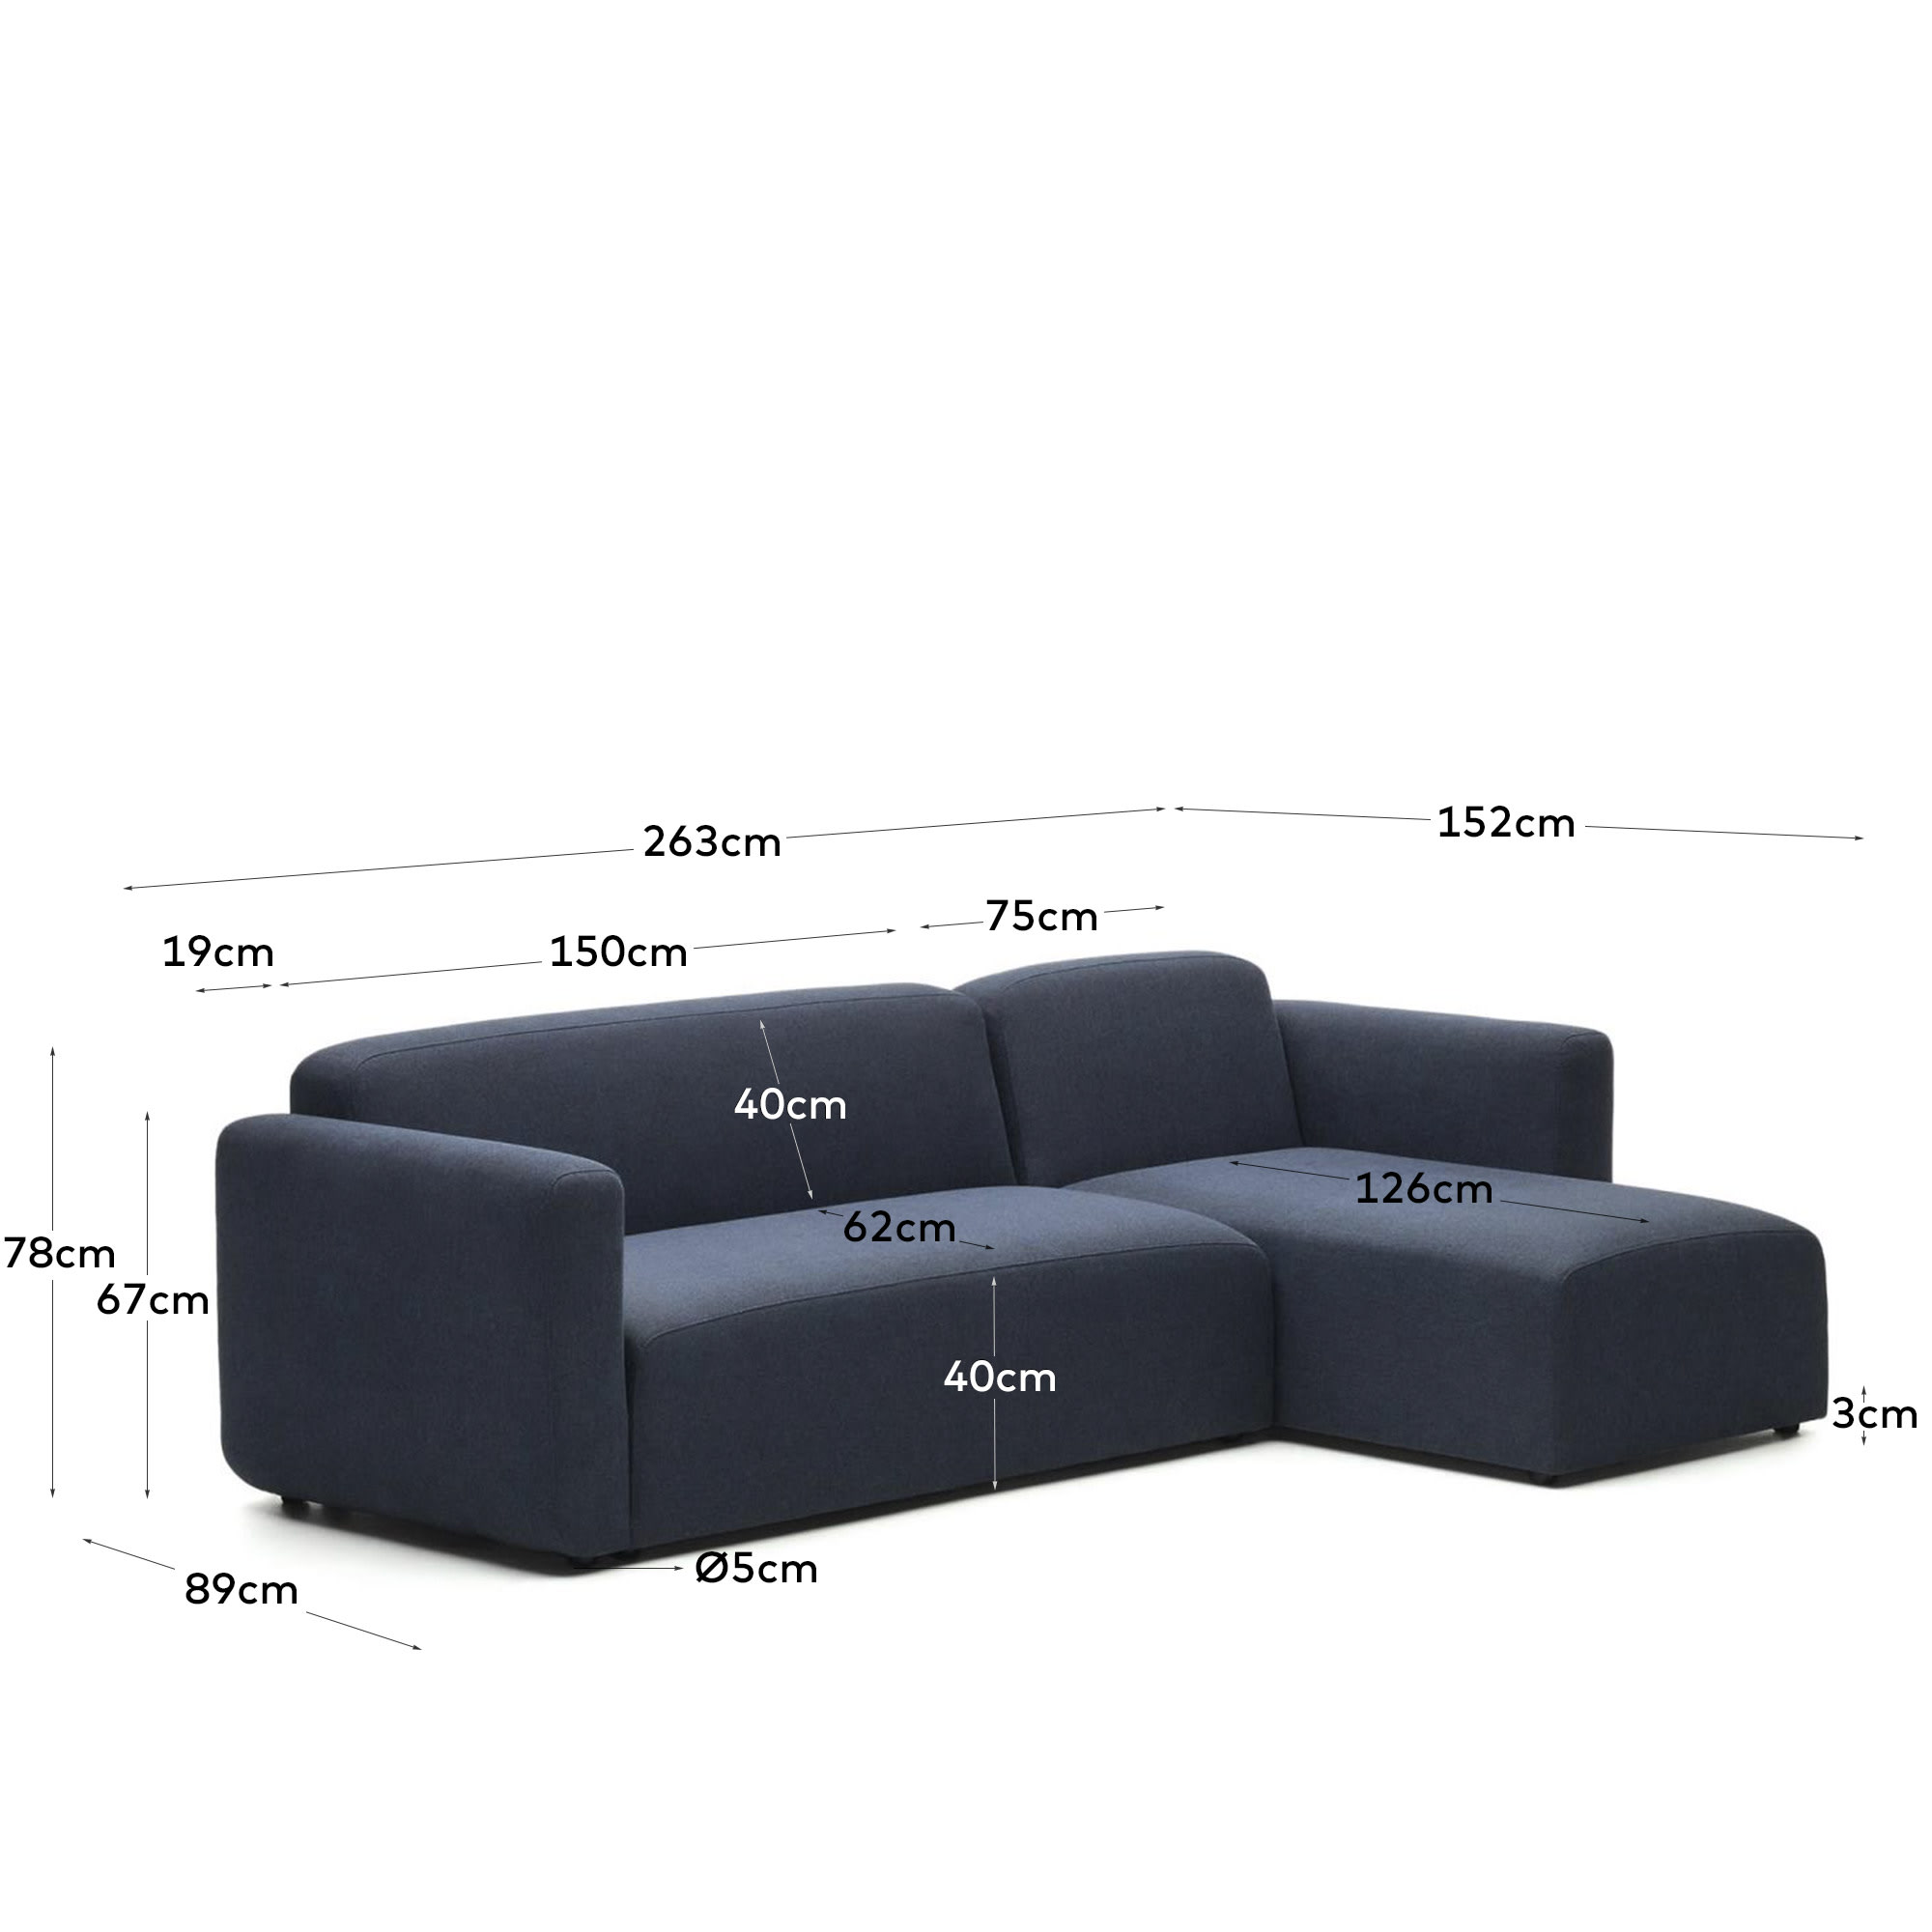 Neom 3 seater modular sofa, right/left chaise longue in blue, 263 cm - sizes